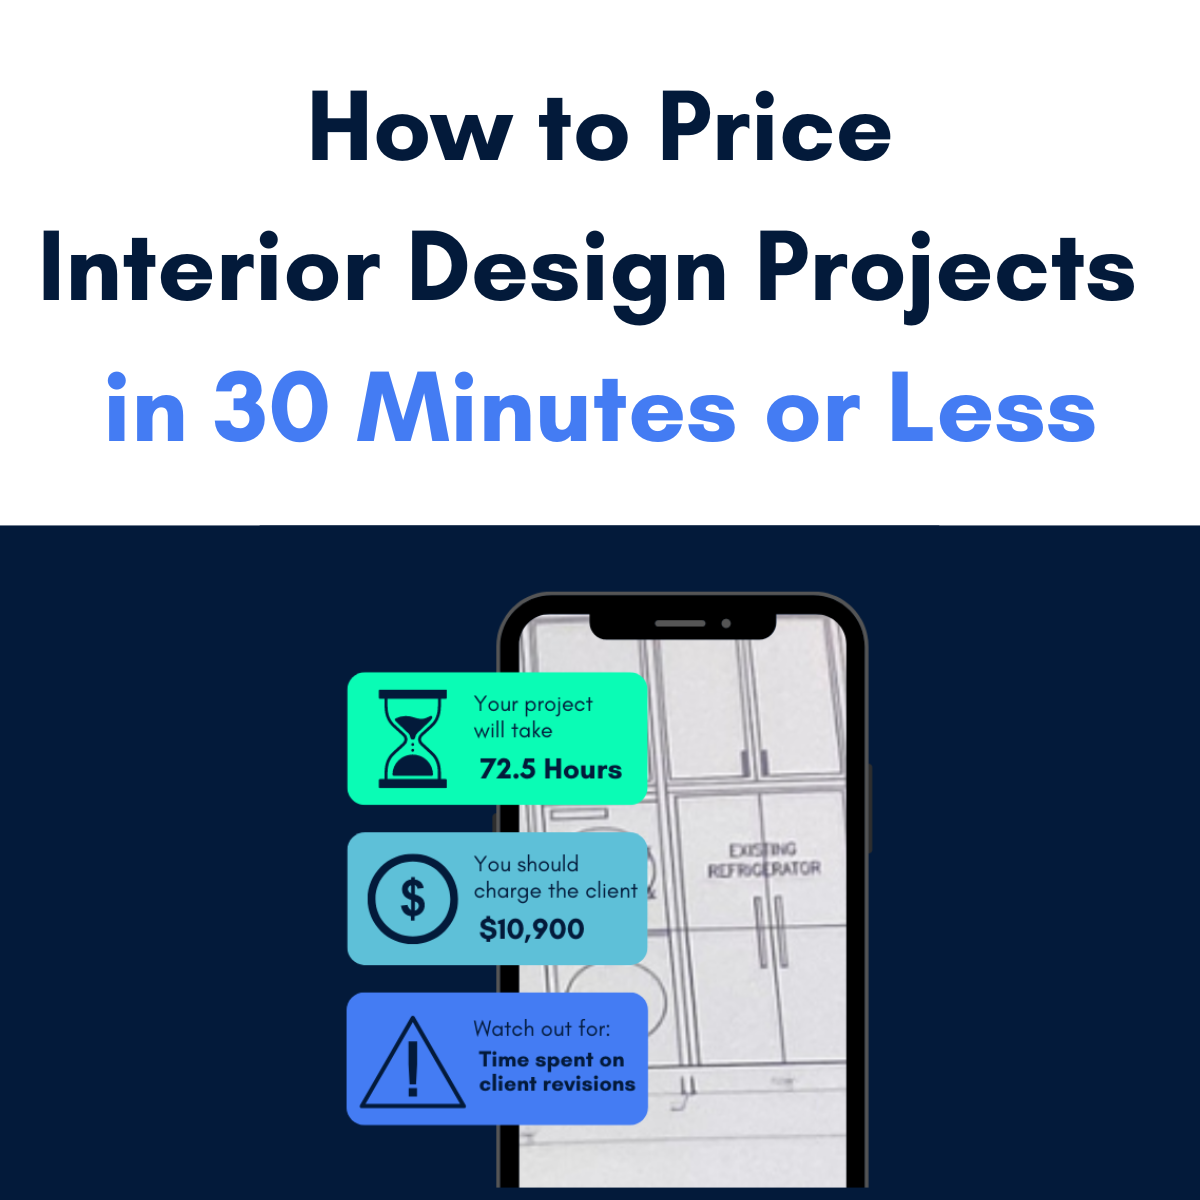 How to price interior design projects in 30 minutes or less